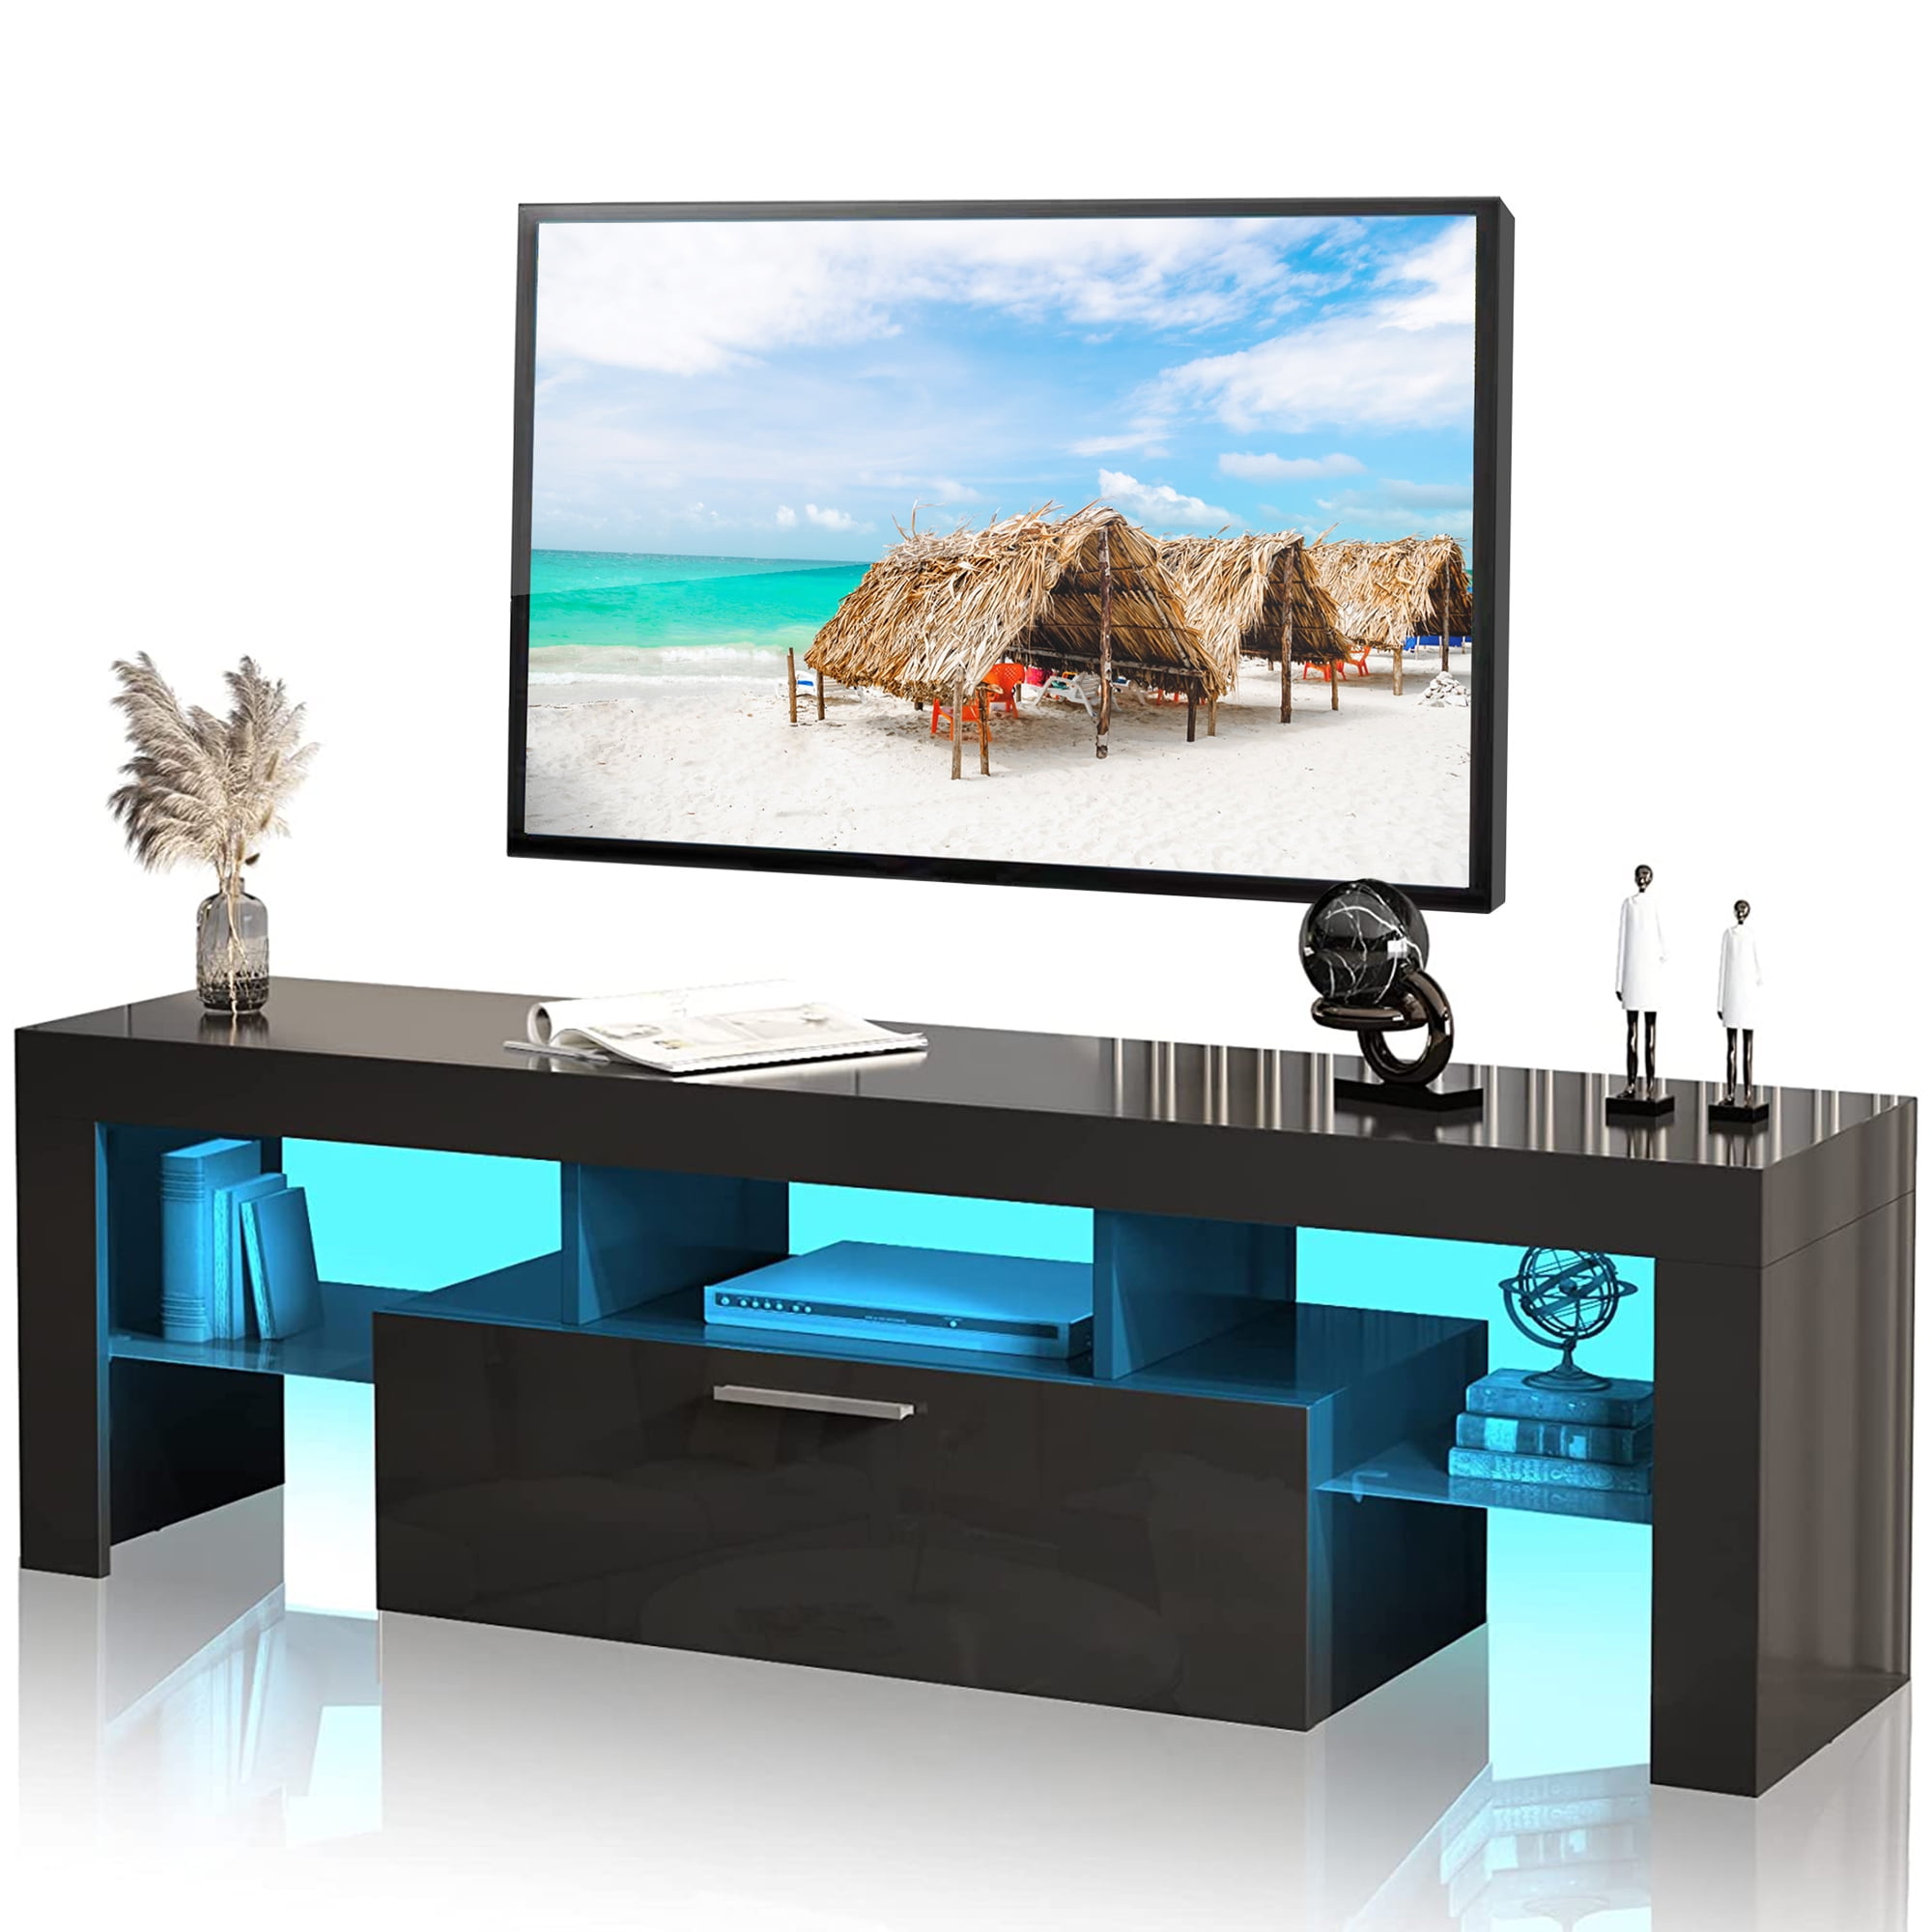 PAPROOS TV Stand for 55 Inch TV, Modern High Gloss TV Cabinet with RGB LED  Lights, Living Room TV Console Table with Storage Drawers and Glass